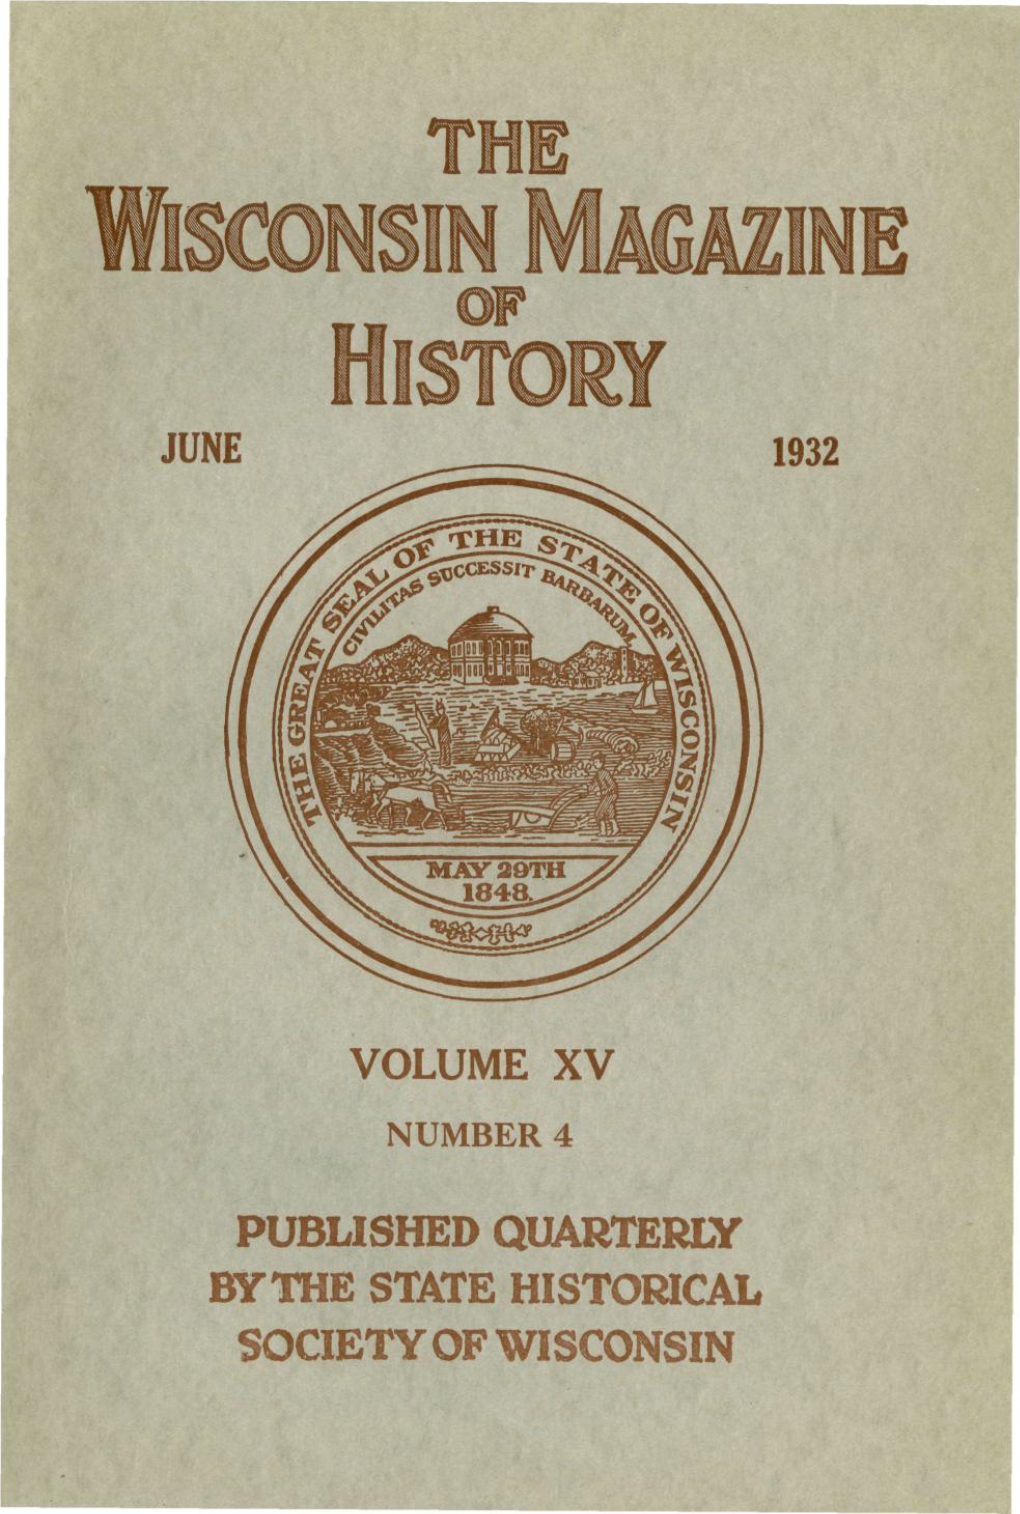 June 1932 Volume Xv Published Quarterly by the State